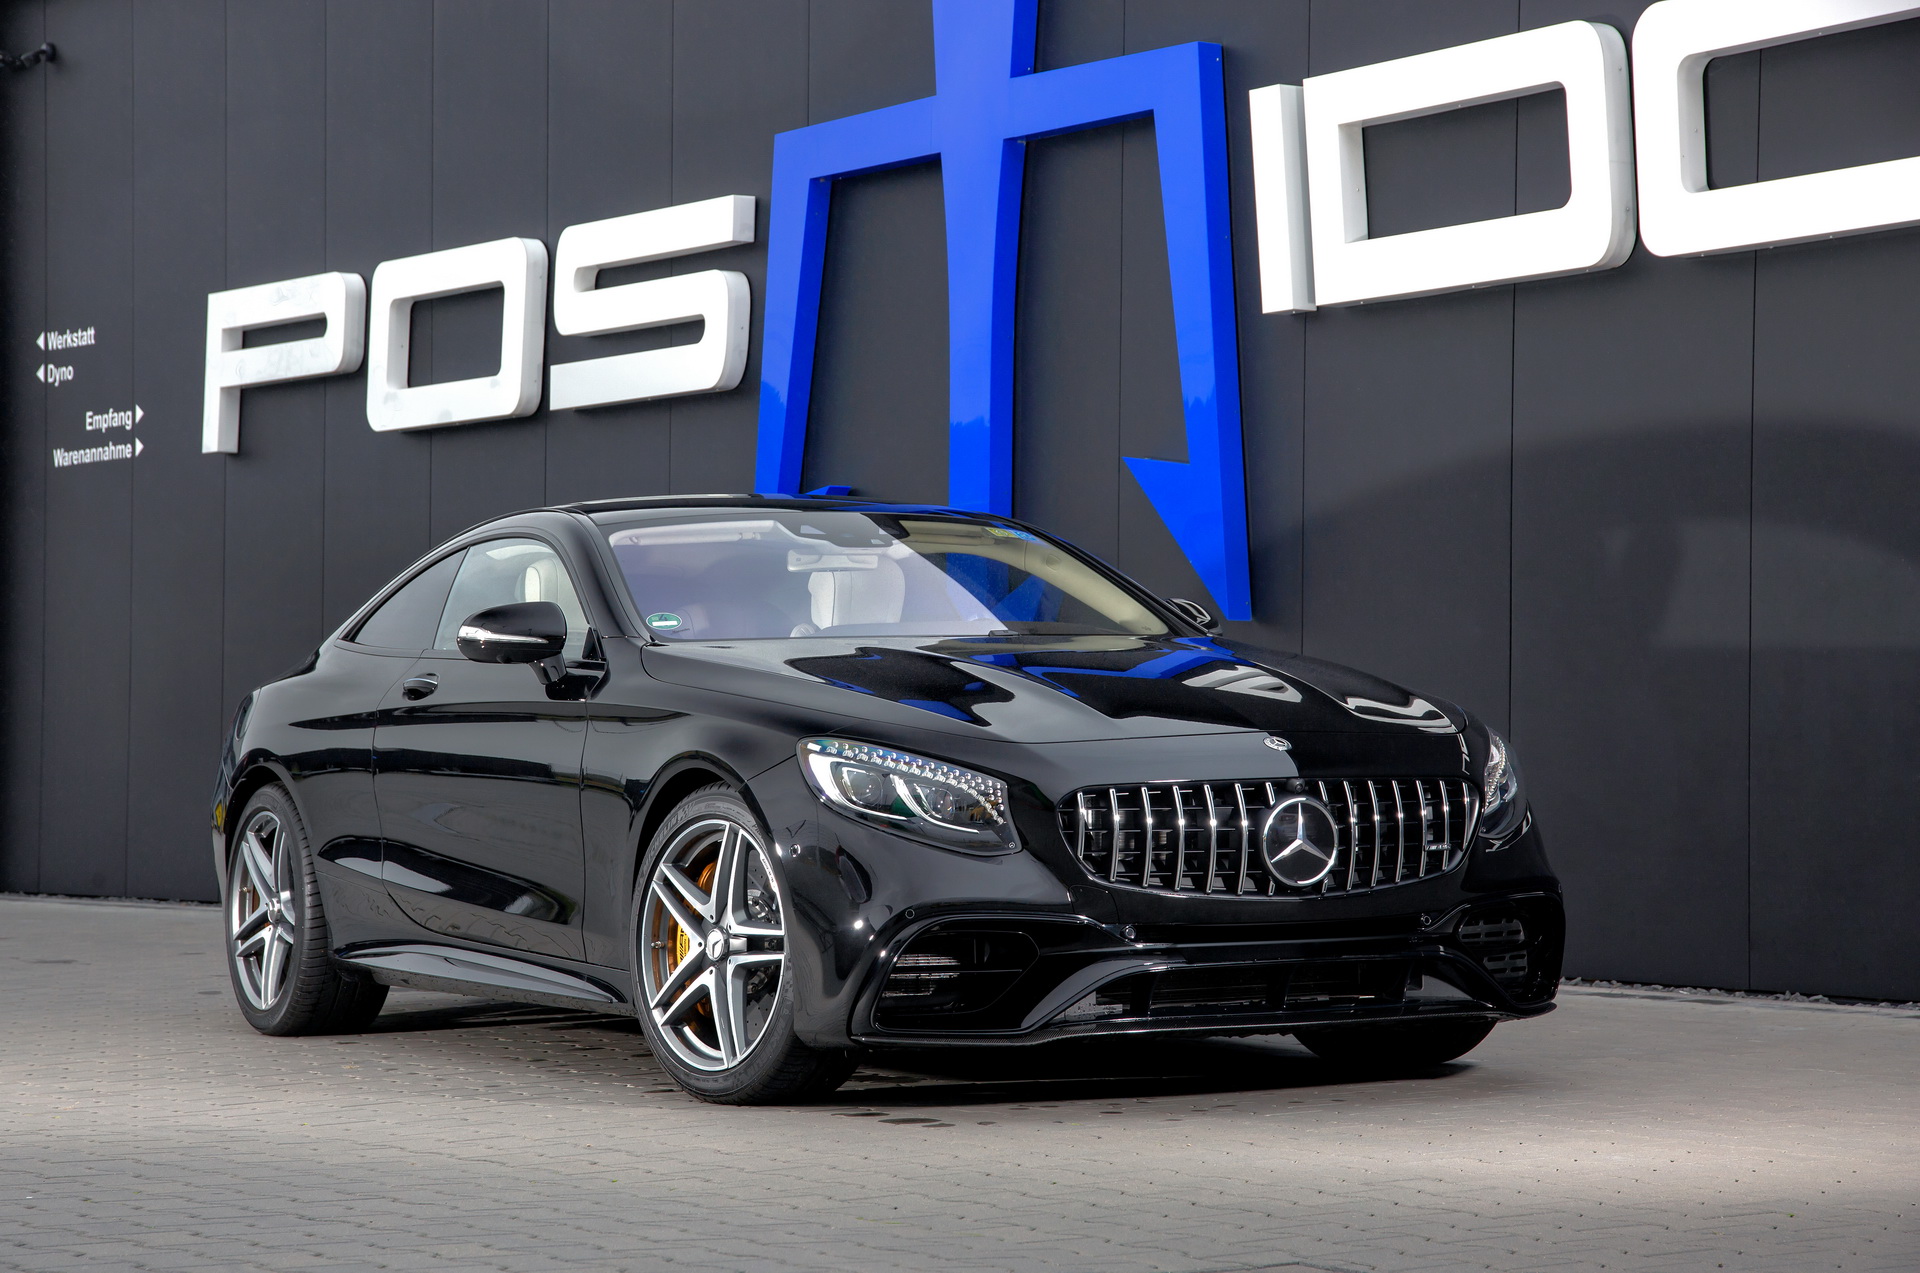 2021 Mercedes-AMG S63 Coupe Gets 927 HP From Posaidon